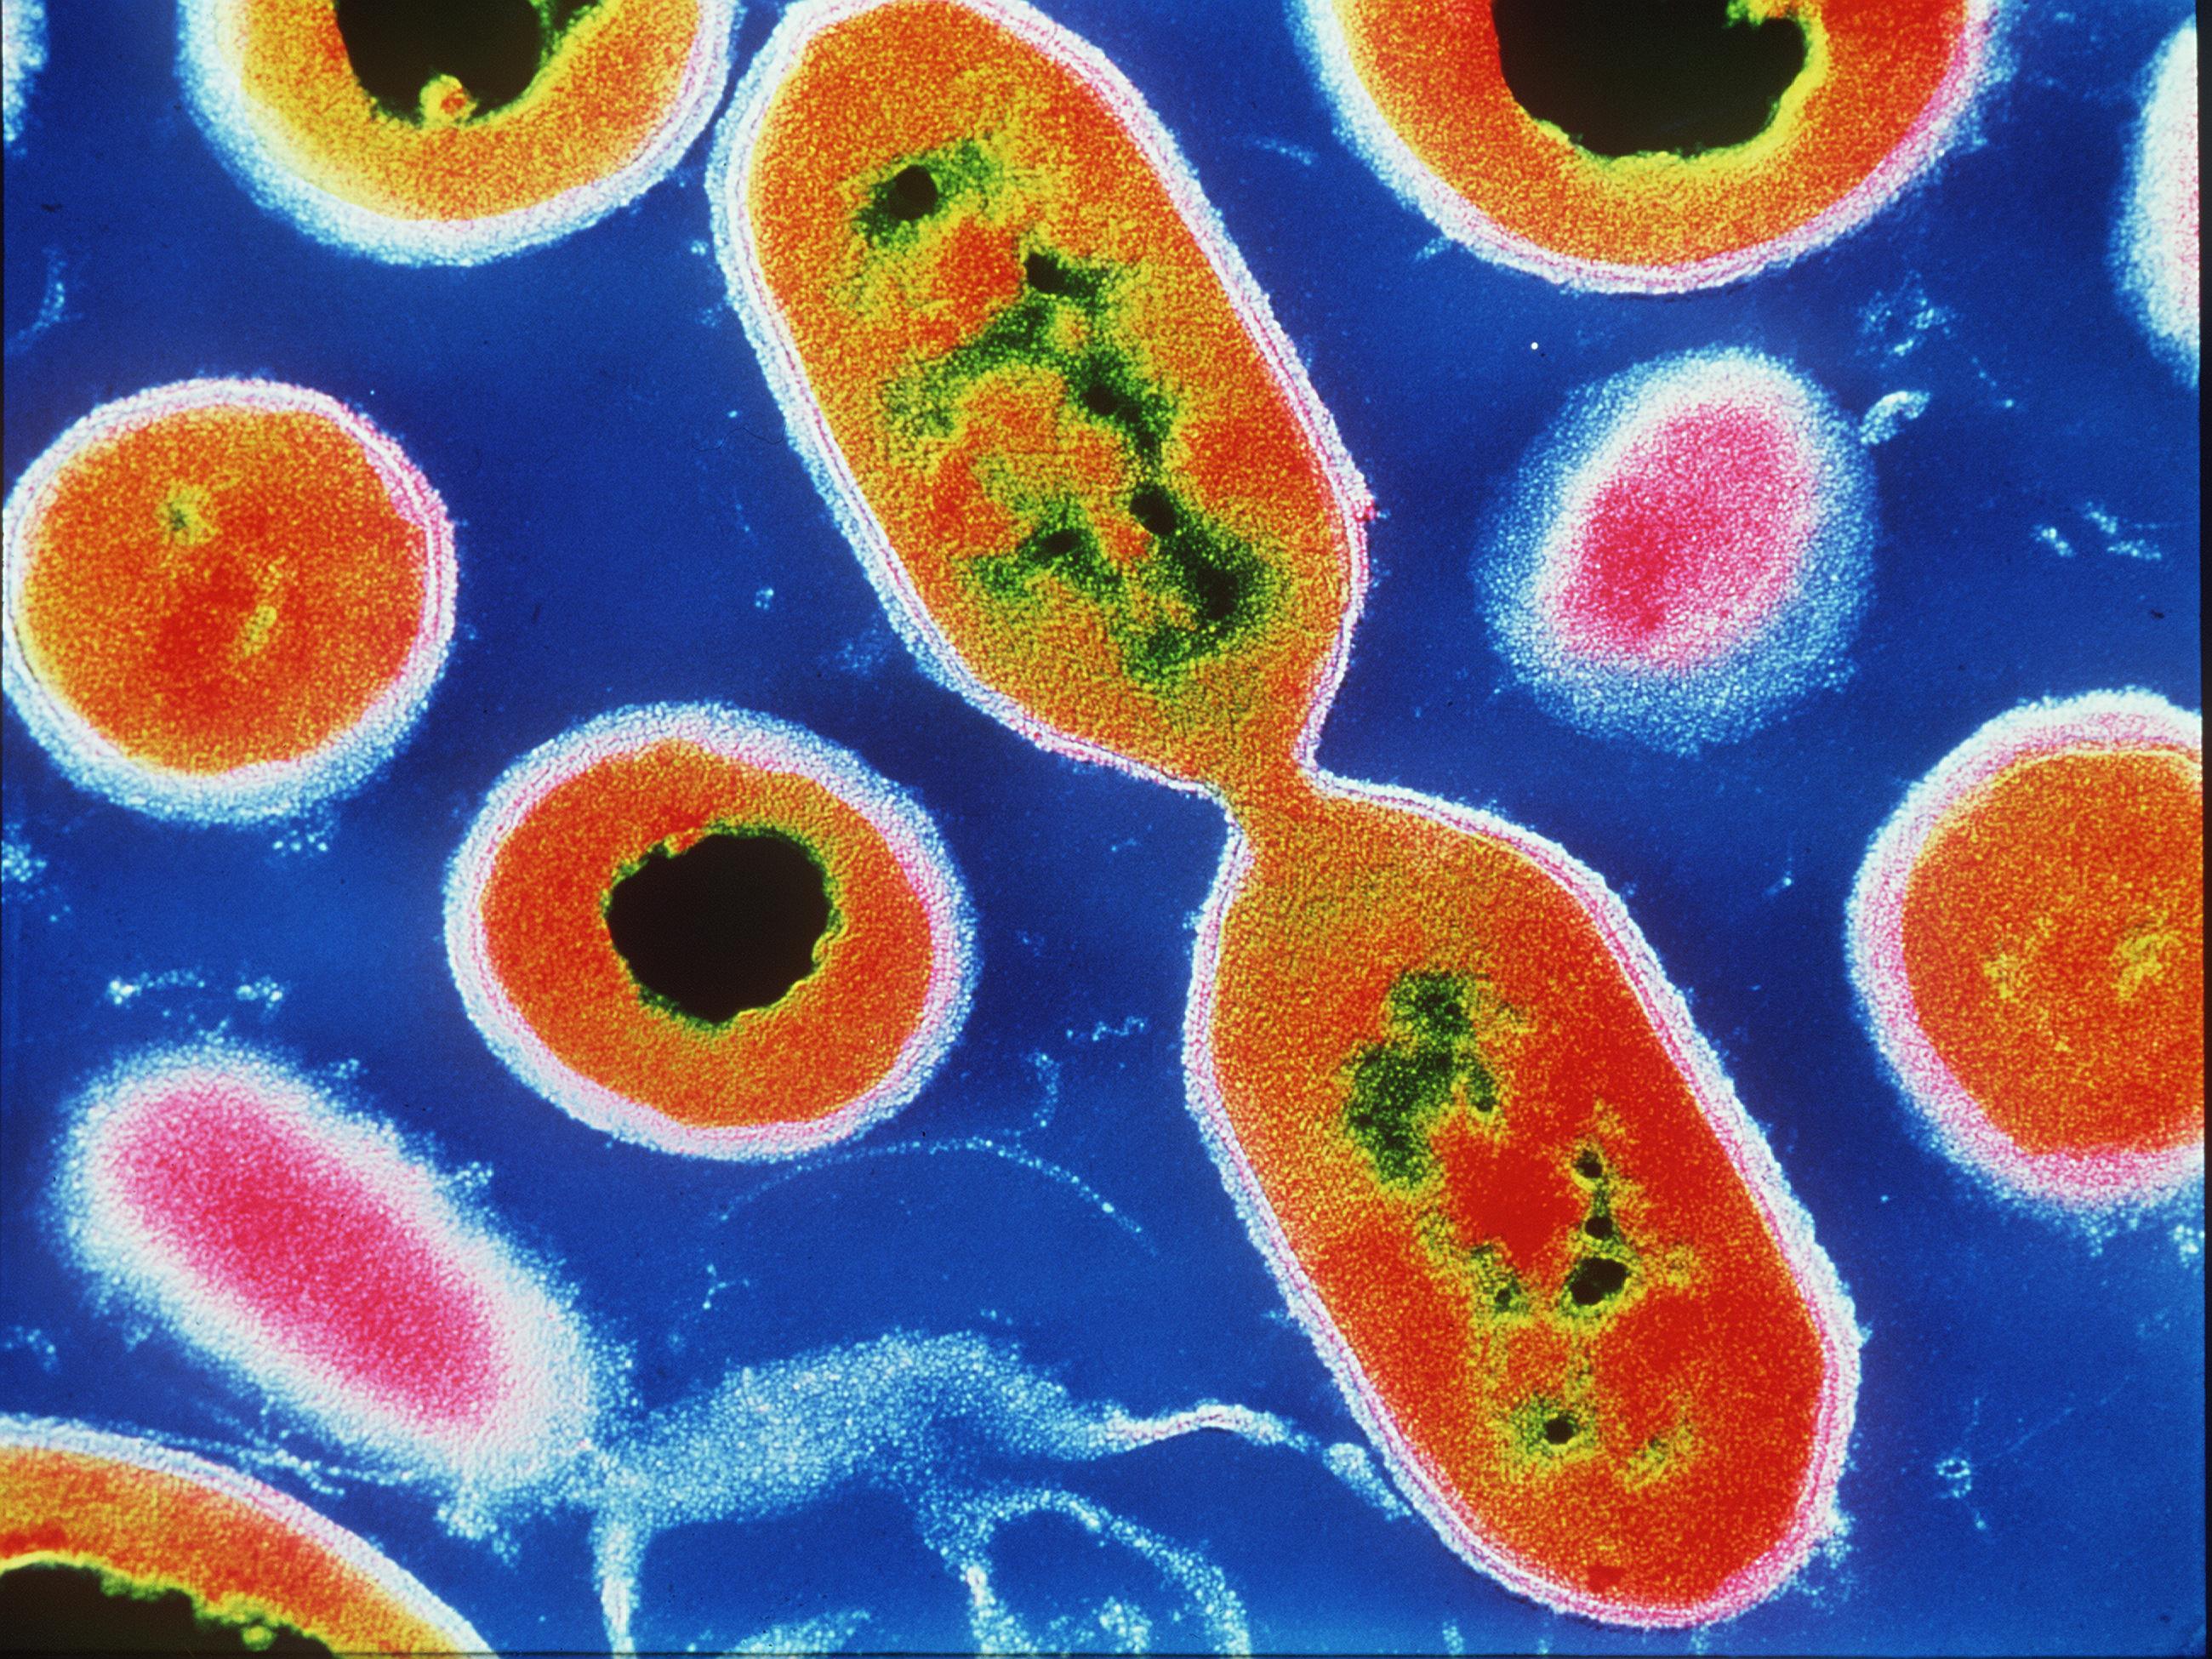 Listeria infections can be severe and even deadly for vulnerable people including those over 65